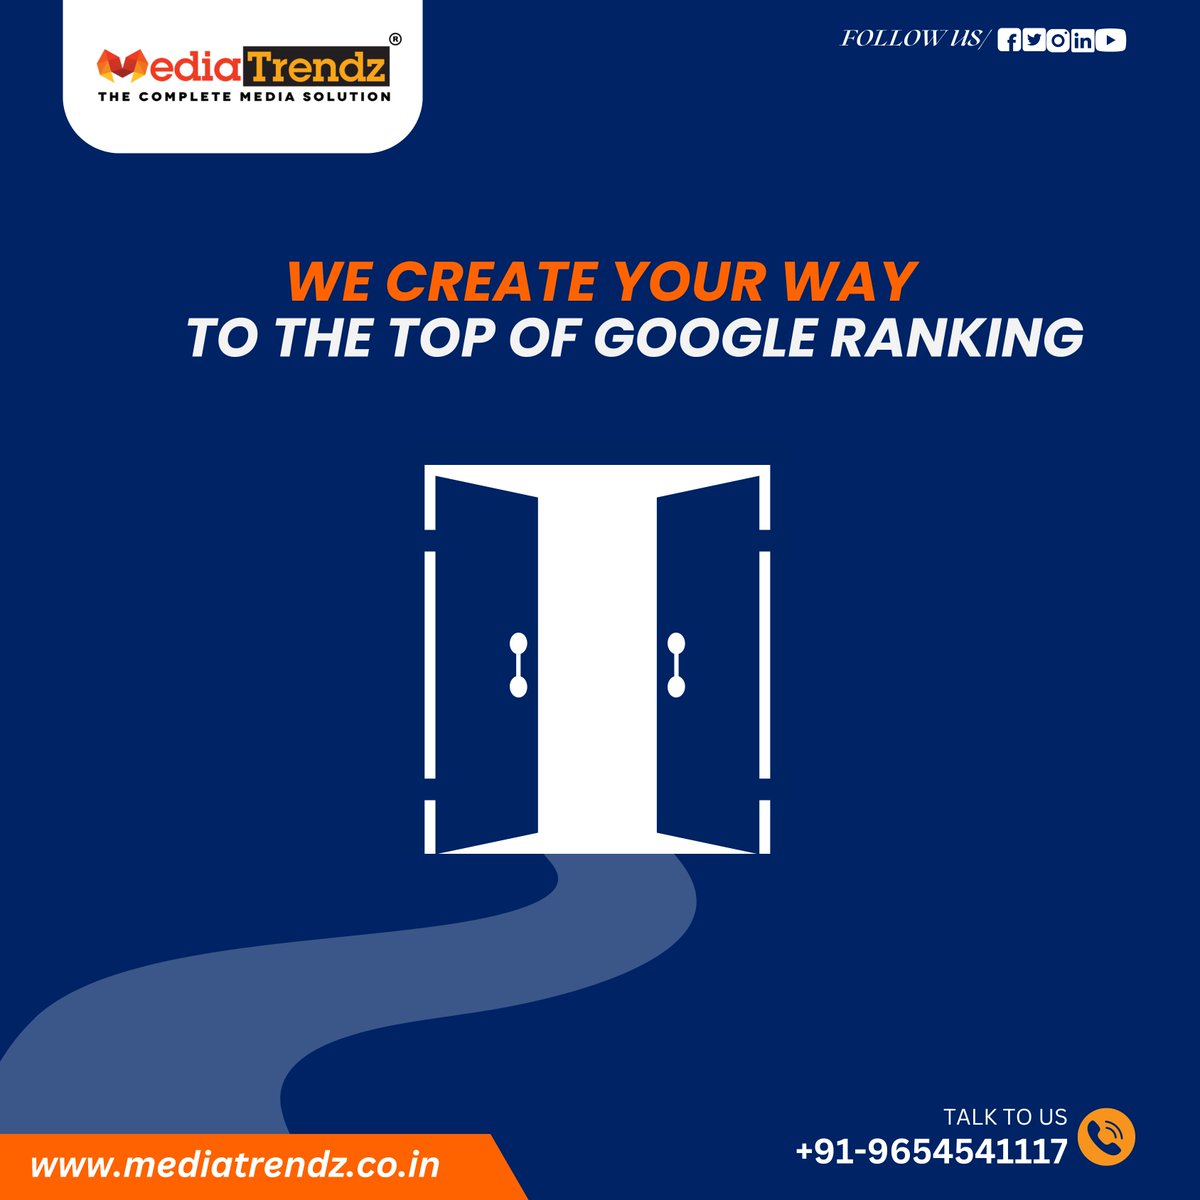 Accelerate your Website to the top of Google rankings with us, where every step propels you higher. 🚀🔝
.
#GoogleRanking #DigitalSuccess #MediaTrendz #PathToTheTop #DigitalGateways #OnlineVisibility #ConquerTheCompetition #DigitalSupremacy #SEOExpertise #NavigateToSuccess